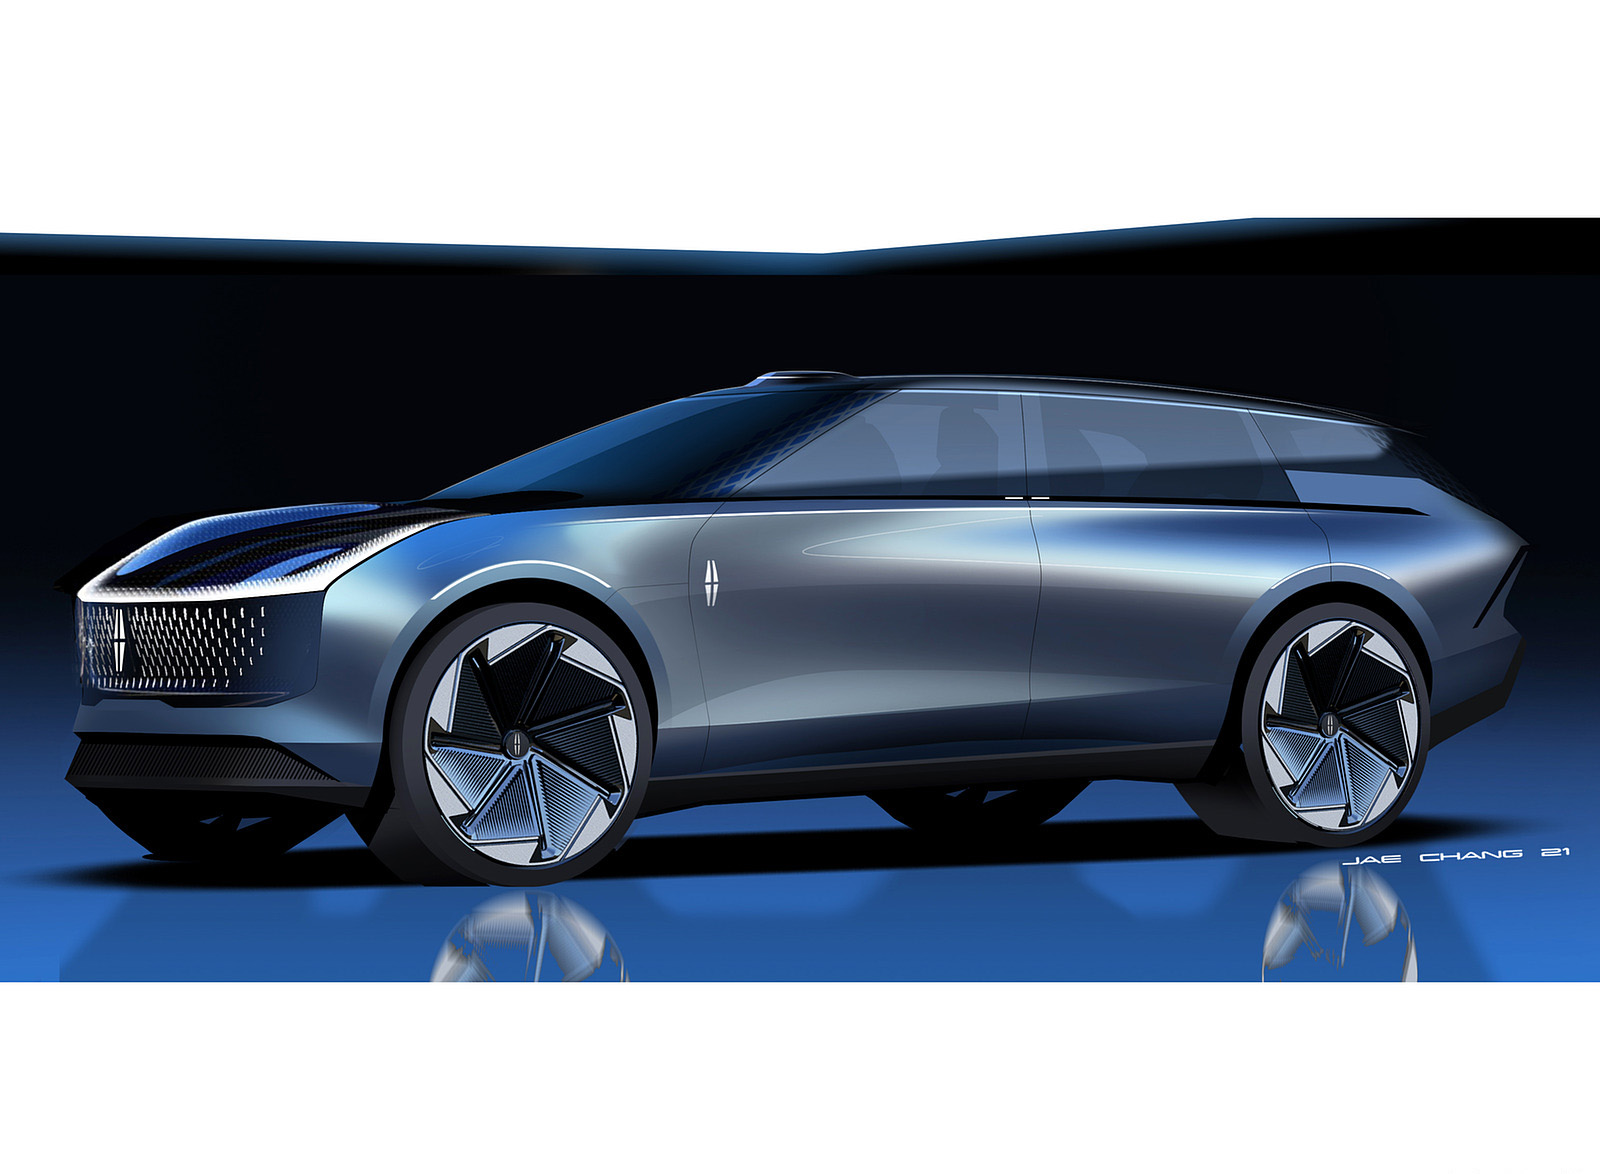 2022 Lincoln Star Concept Design Sketch Wallpapers #14 of 17